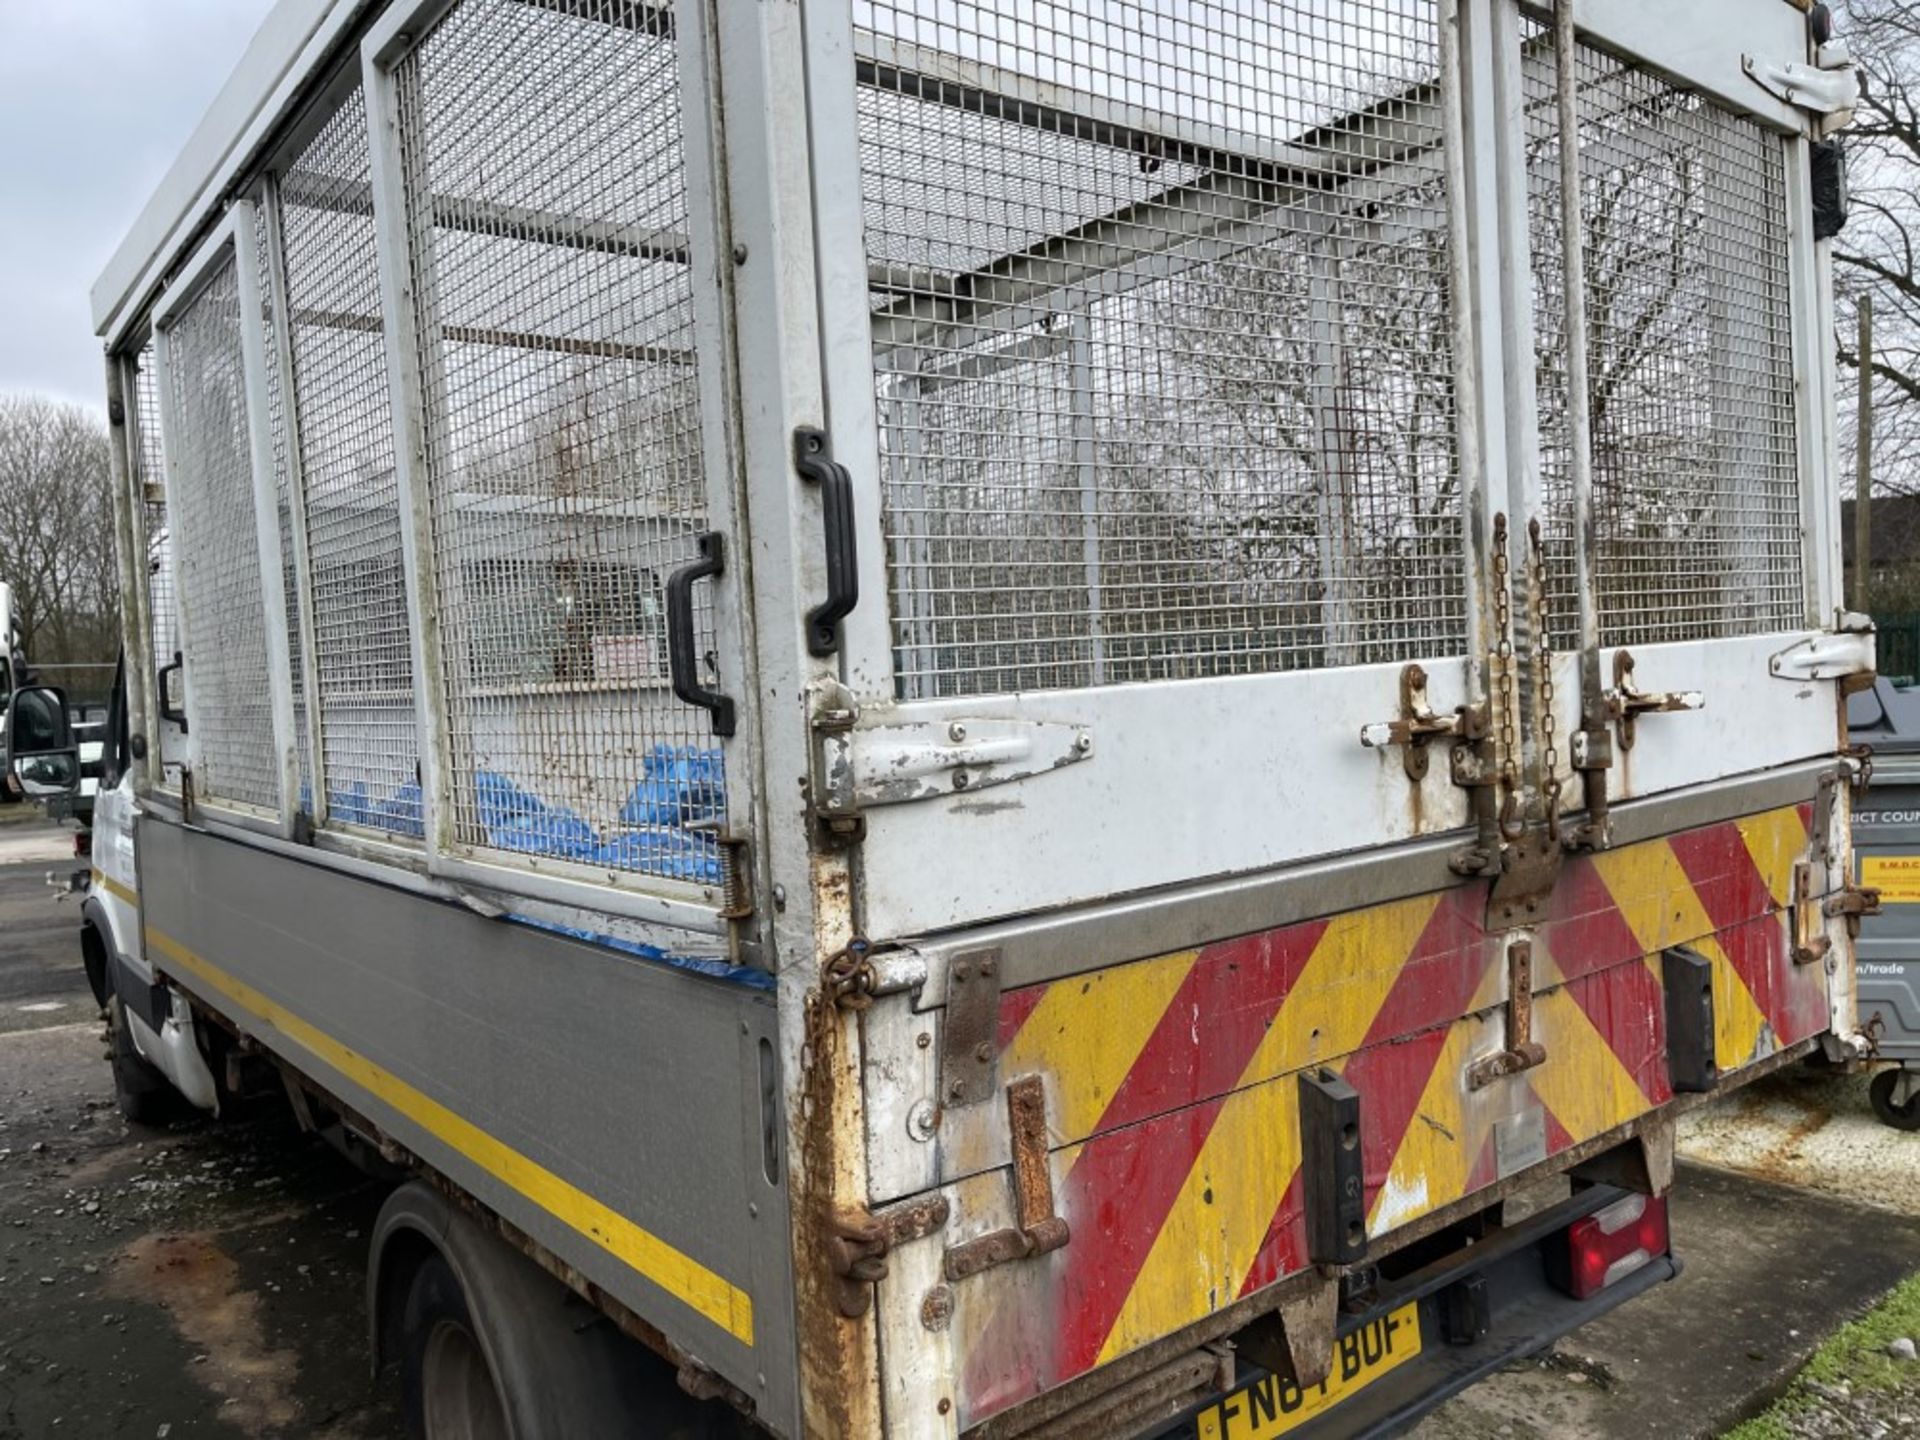 64 reg IVECO 50C15 CAGED TIPPER (DIRECT COUNCIL) (LOCATION LEEK) 1ST REG 09/14, 92959M, V5 TO - Image 4 of 5